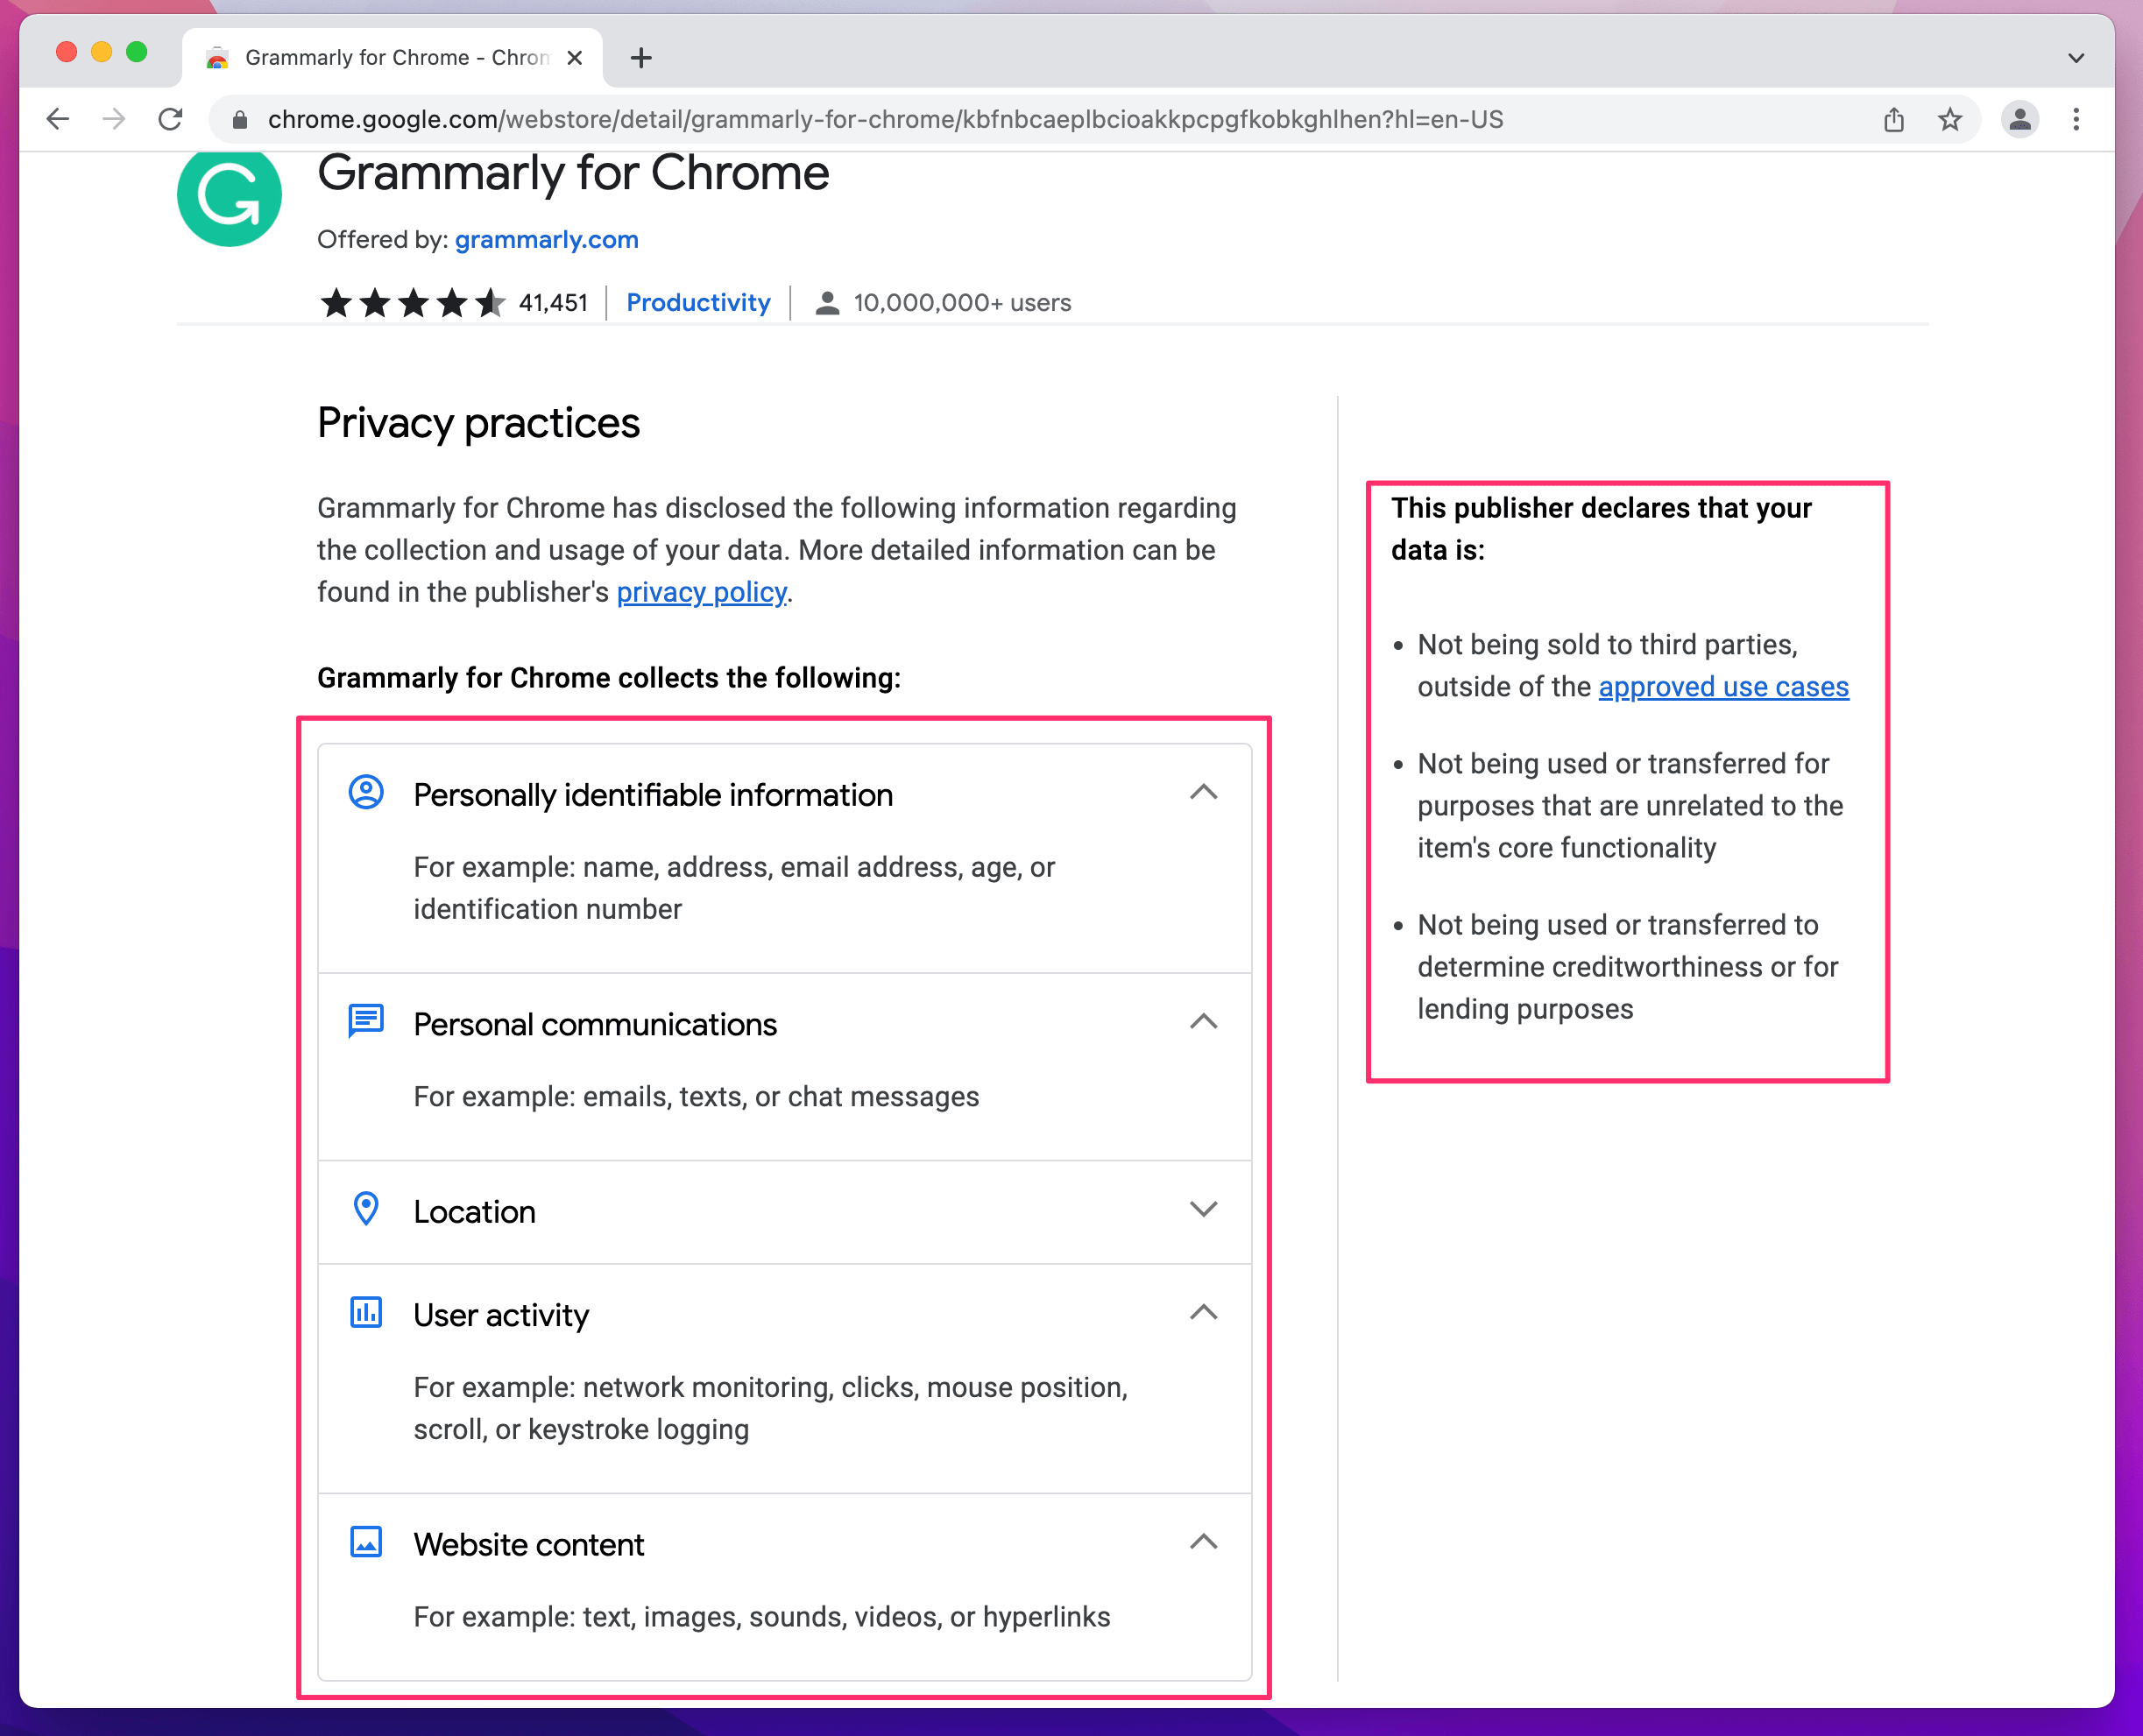 A screenshot of the Grammarly privacy disclosure page on the Google Web Store. It shows that Grammarly collects and sends a lot of personal information including the contents of webpages, the location of the user, user activity, and personal communications